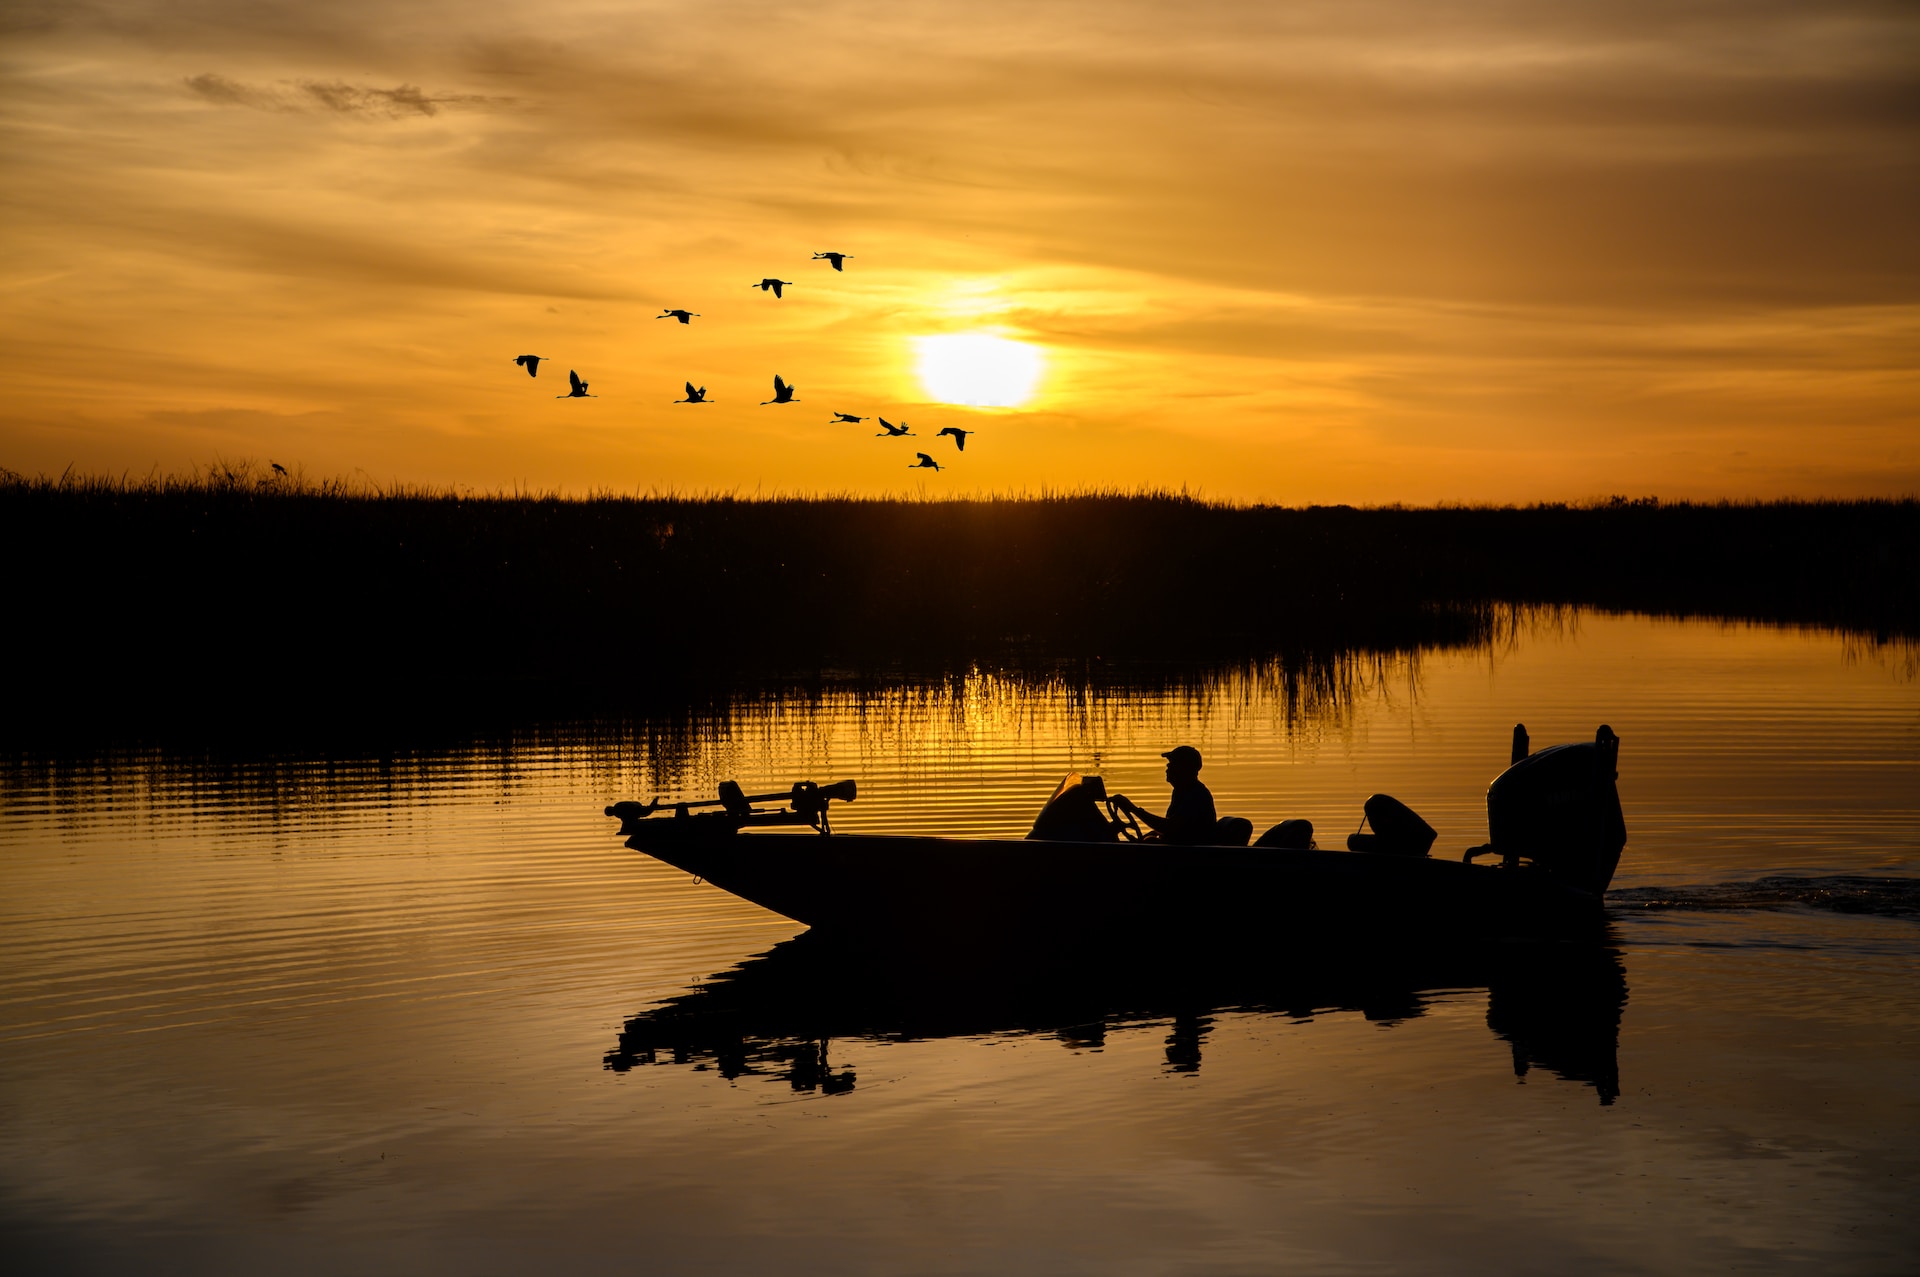 Boaters on the Everglades